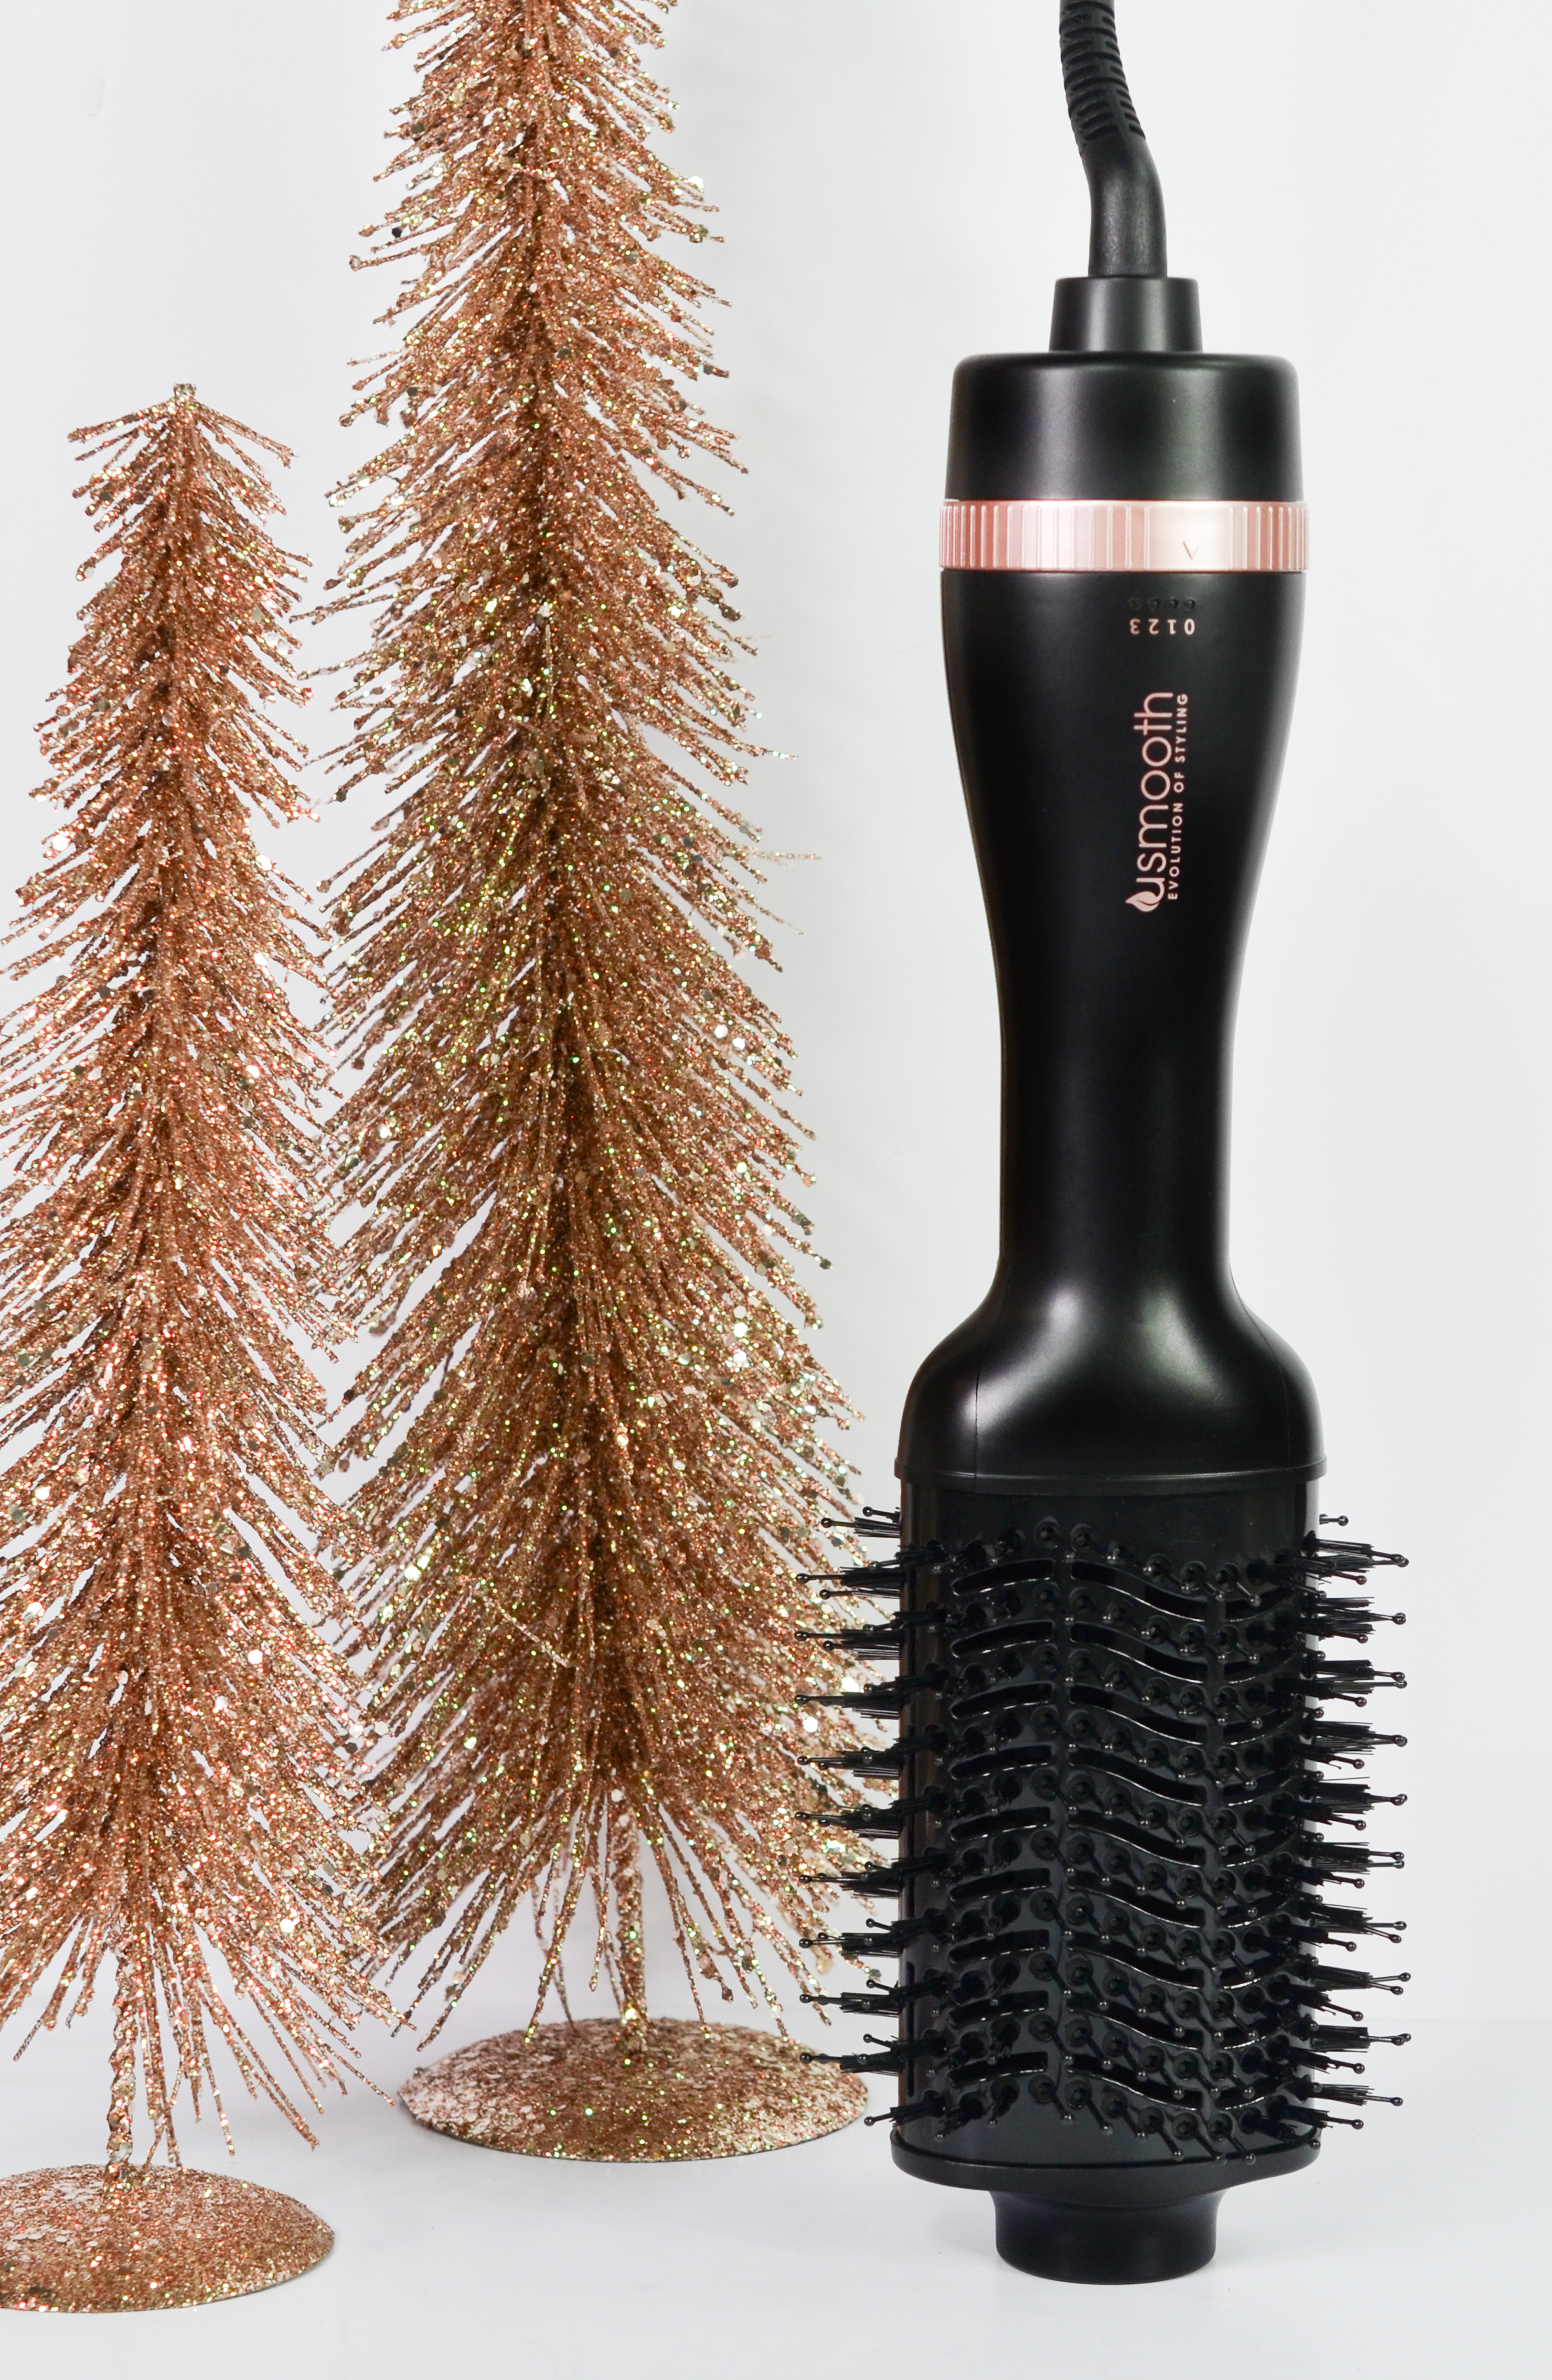 The best blow dry brush for stylist blowout hair!